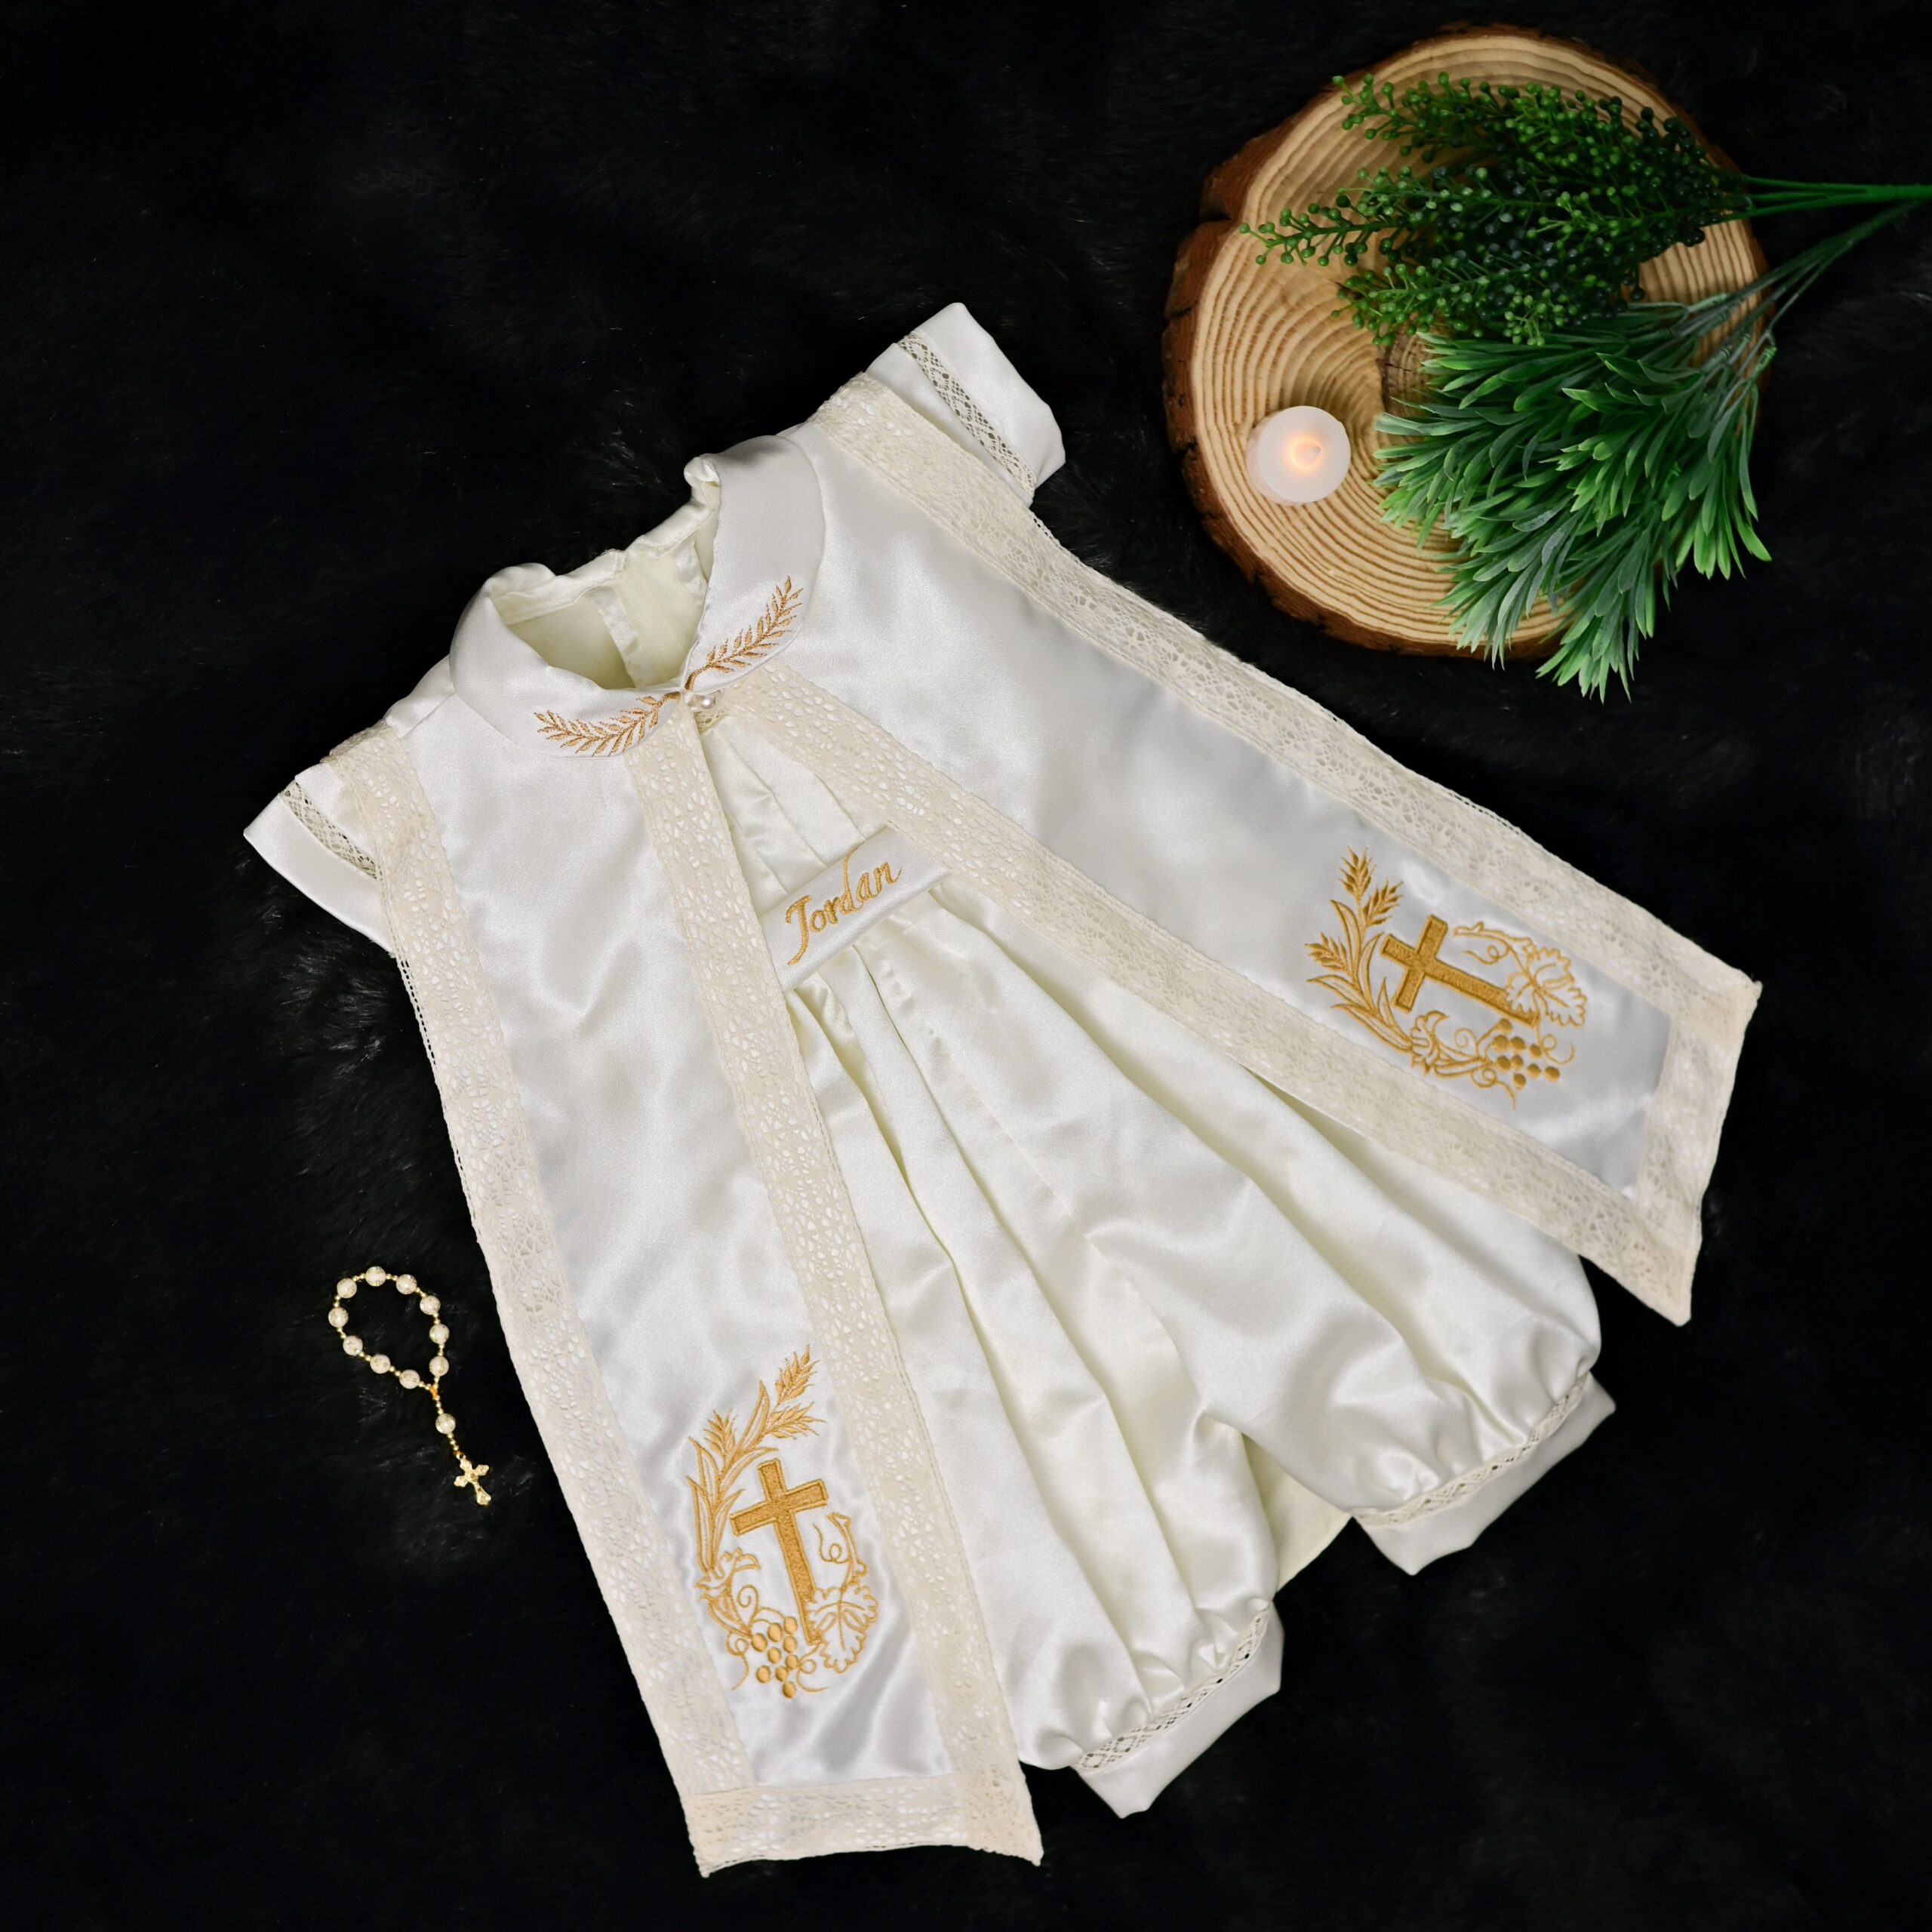 Christening Gown Boy, Boy Baptism Outfit - Etsy